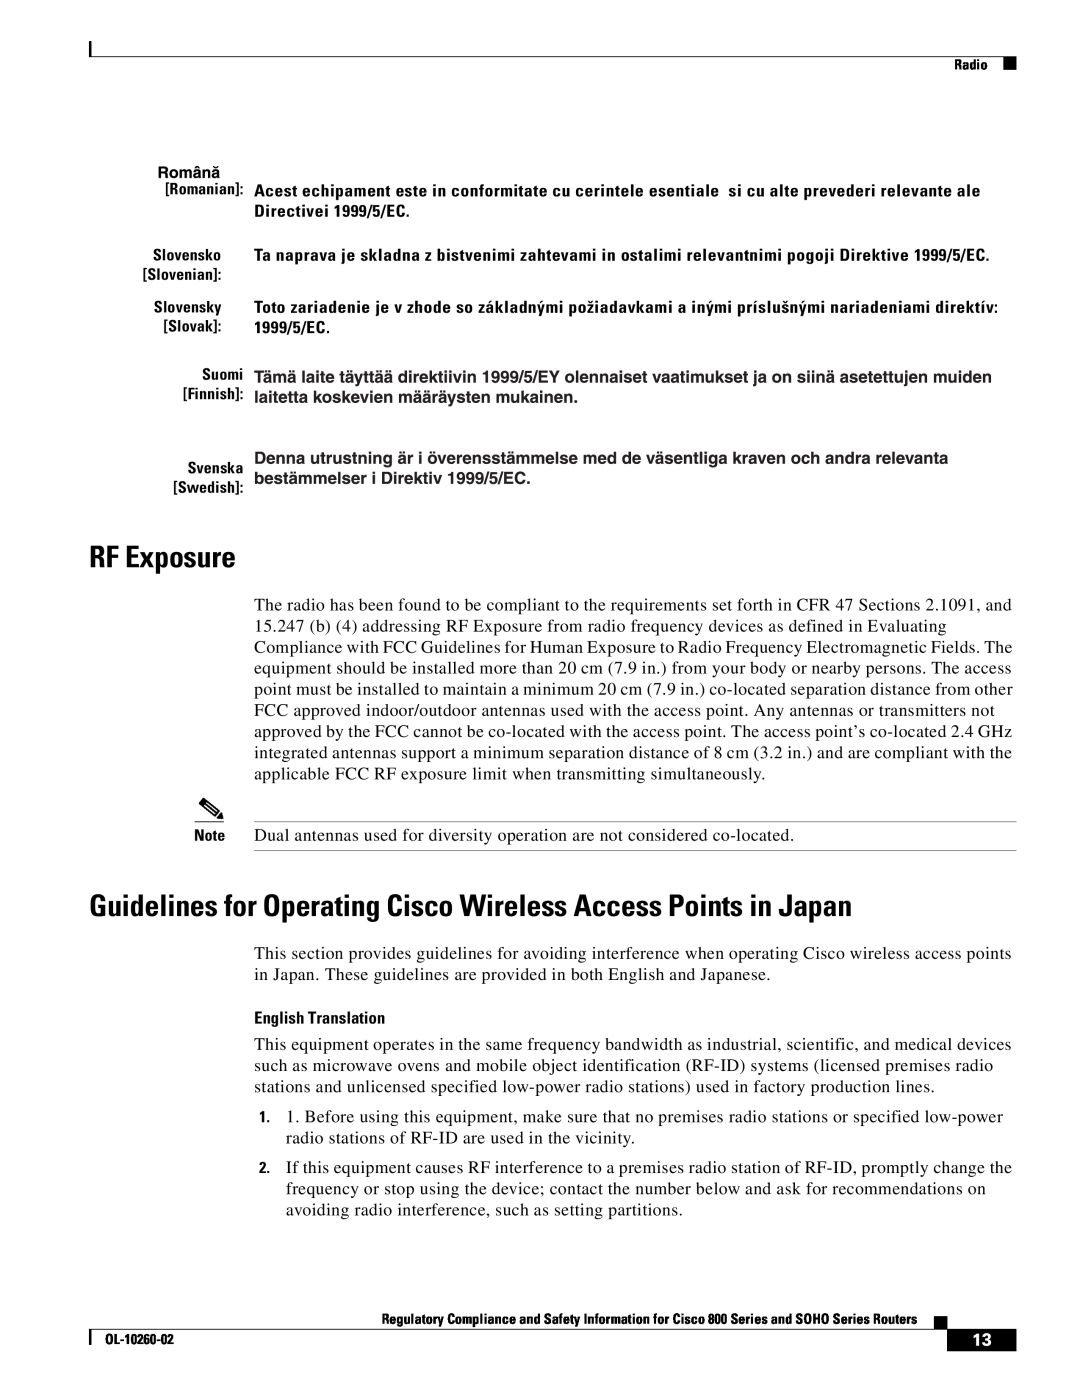 Cisco Systems SOHO Series manual RF Exposure, Guidelines for Operating Cisco Wireless Access Points in Japan 